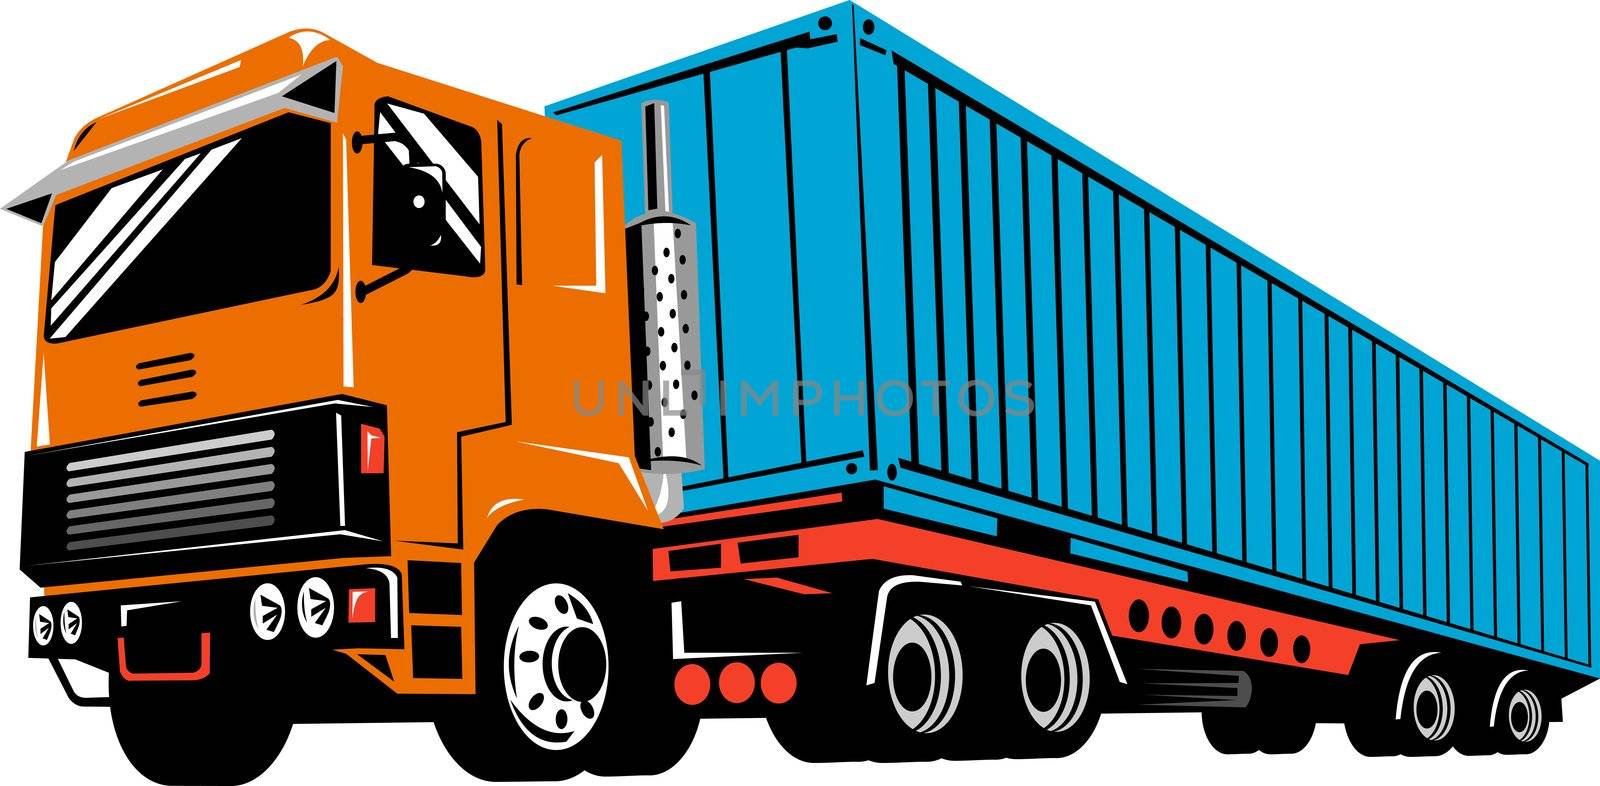 illustration of a container truck lorry done in retro style on isolated background viewed from low angle